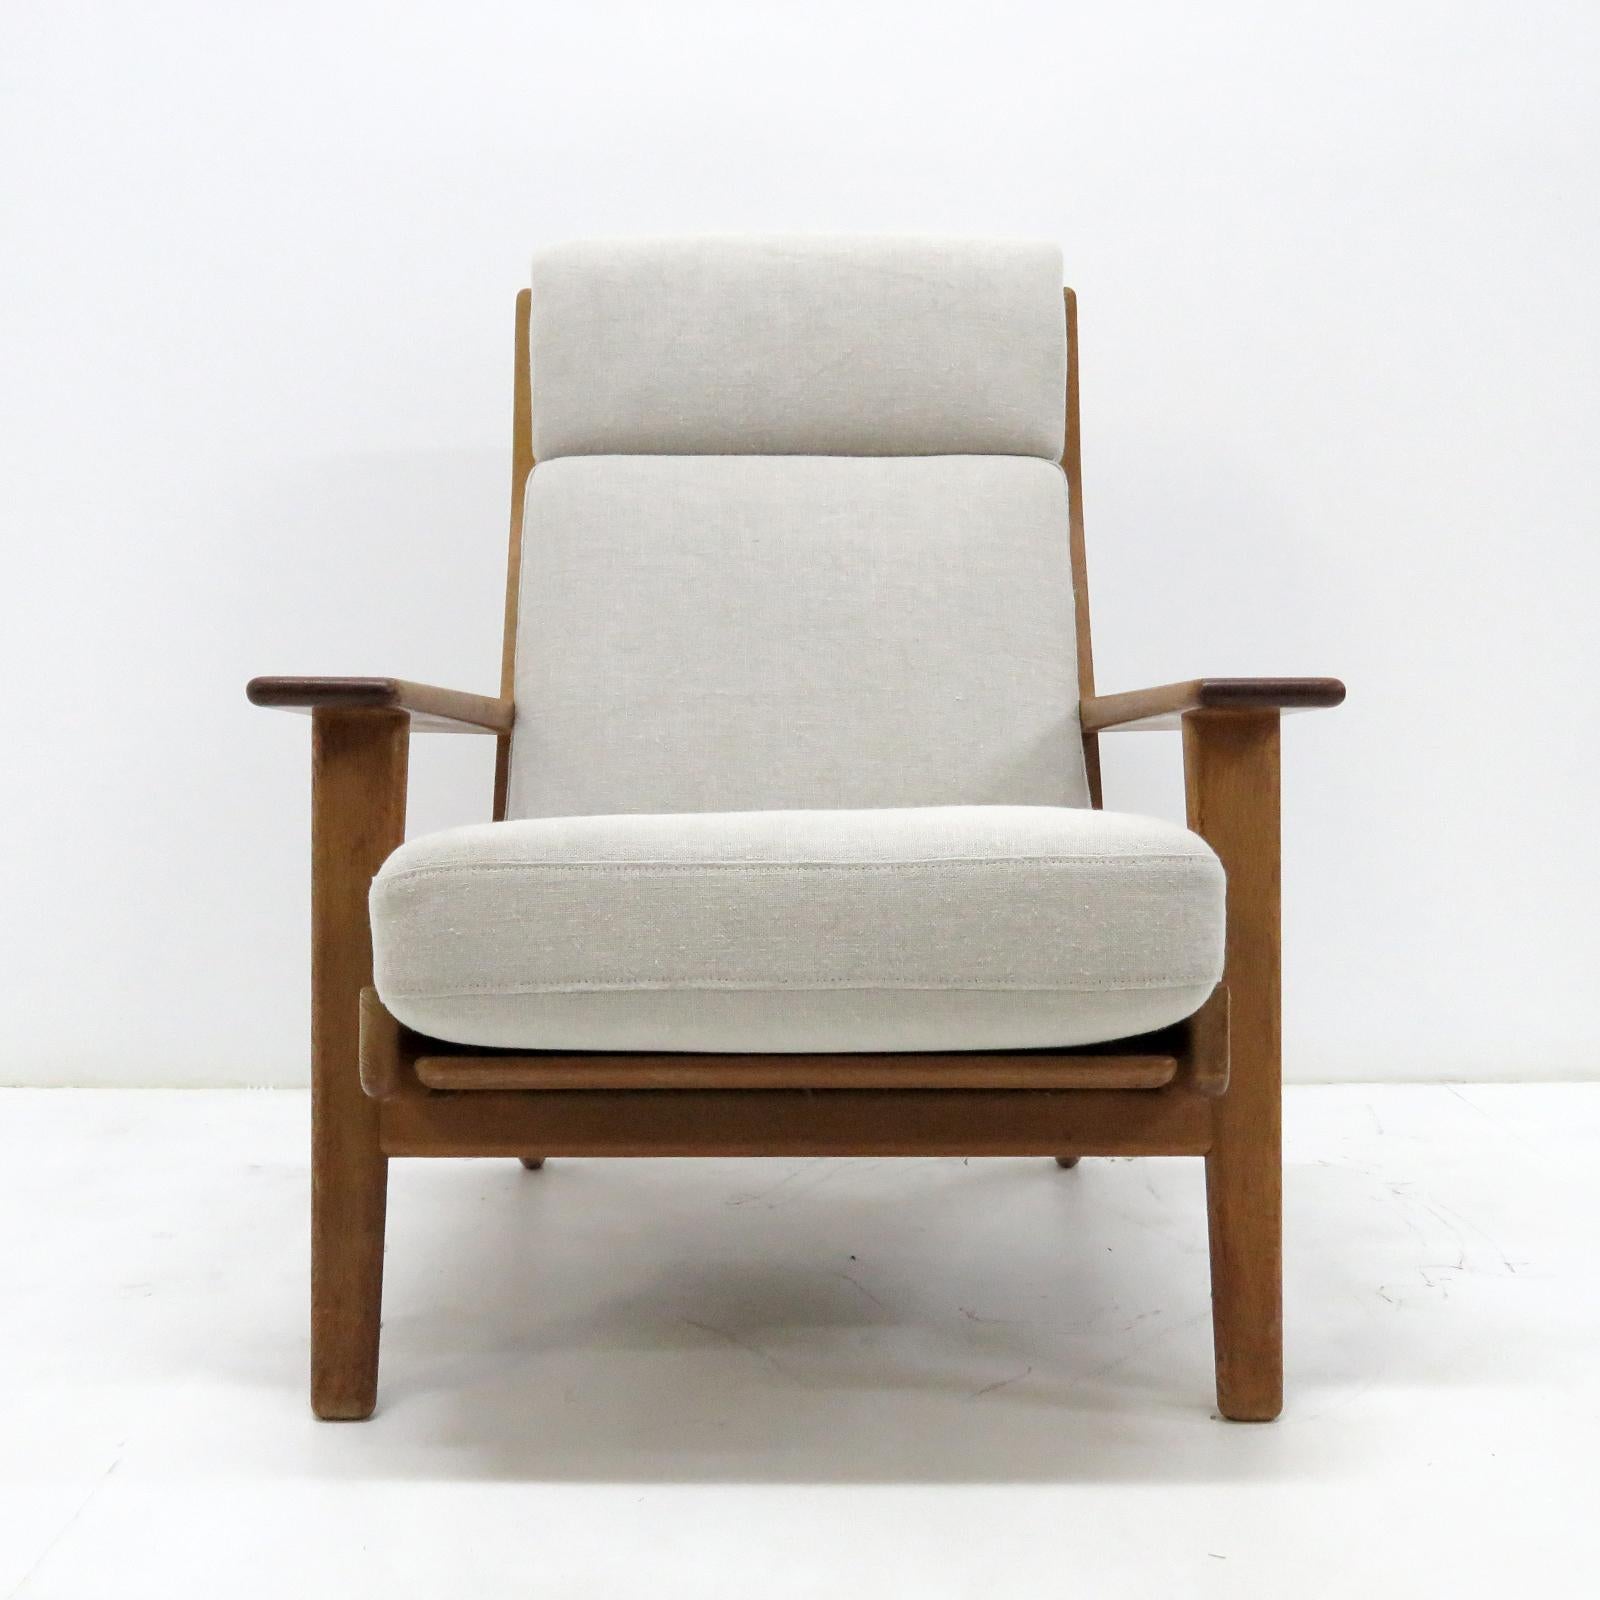 Wonderful high back lounge chair GE290 by Hans J Wegner for GETAMA, solid oak frame with nice patina and original cushions newly upholstered in Belgian linen fabric, marked.